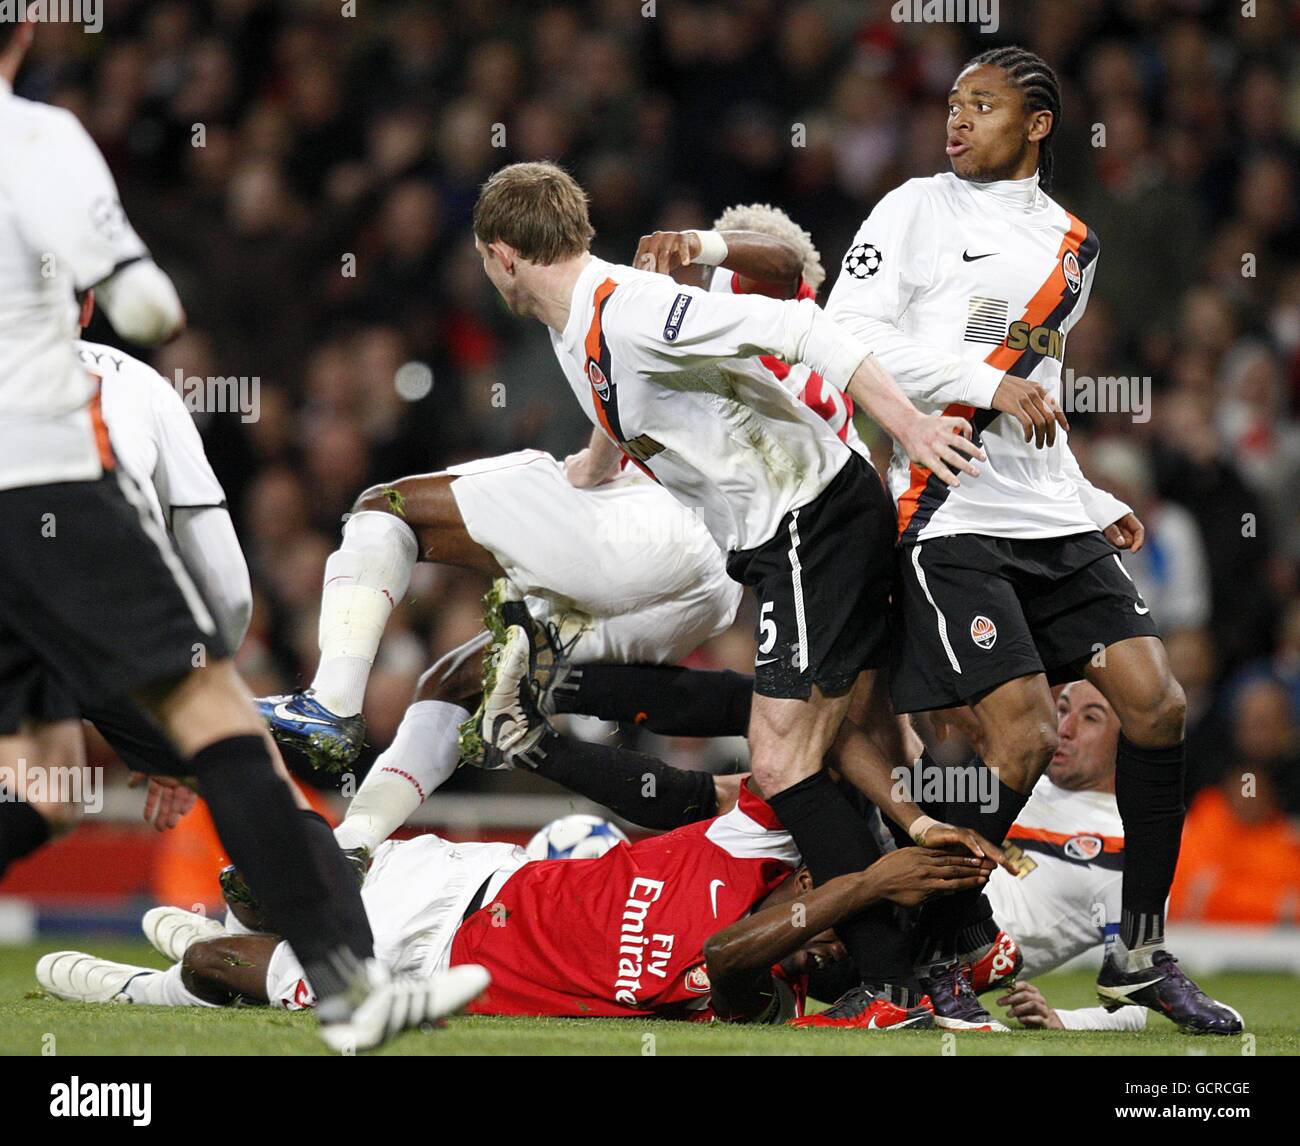 Arsenal's Johan Djourou (floor) is fouled by Shakhtar Donetsk's da Silva Luiz Adriano (right) resulting in a penalty scored by Arsenal's Francesc Fabregas Stock Photo